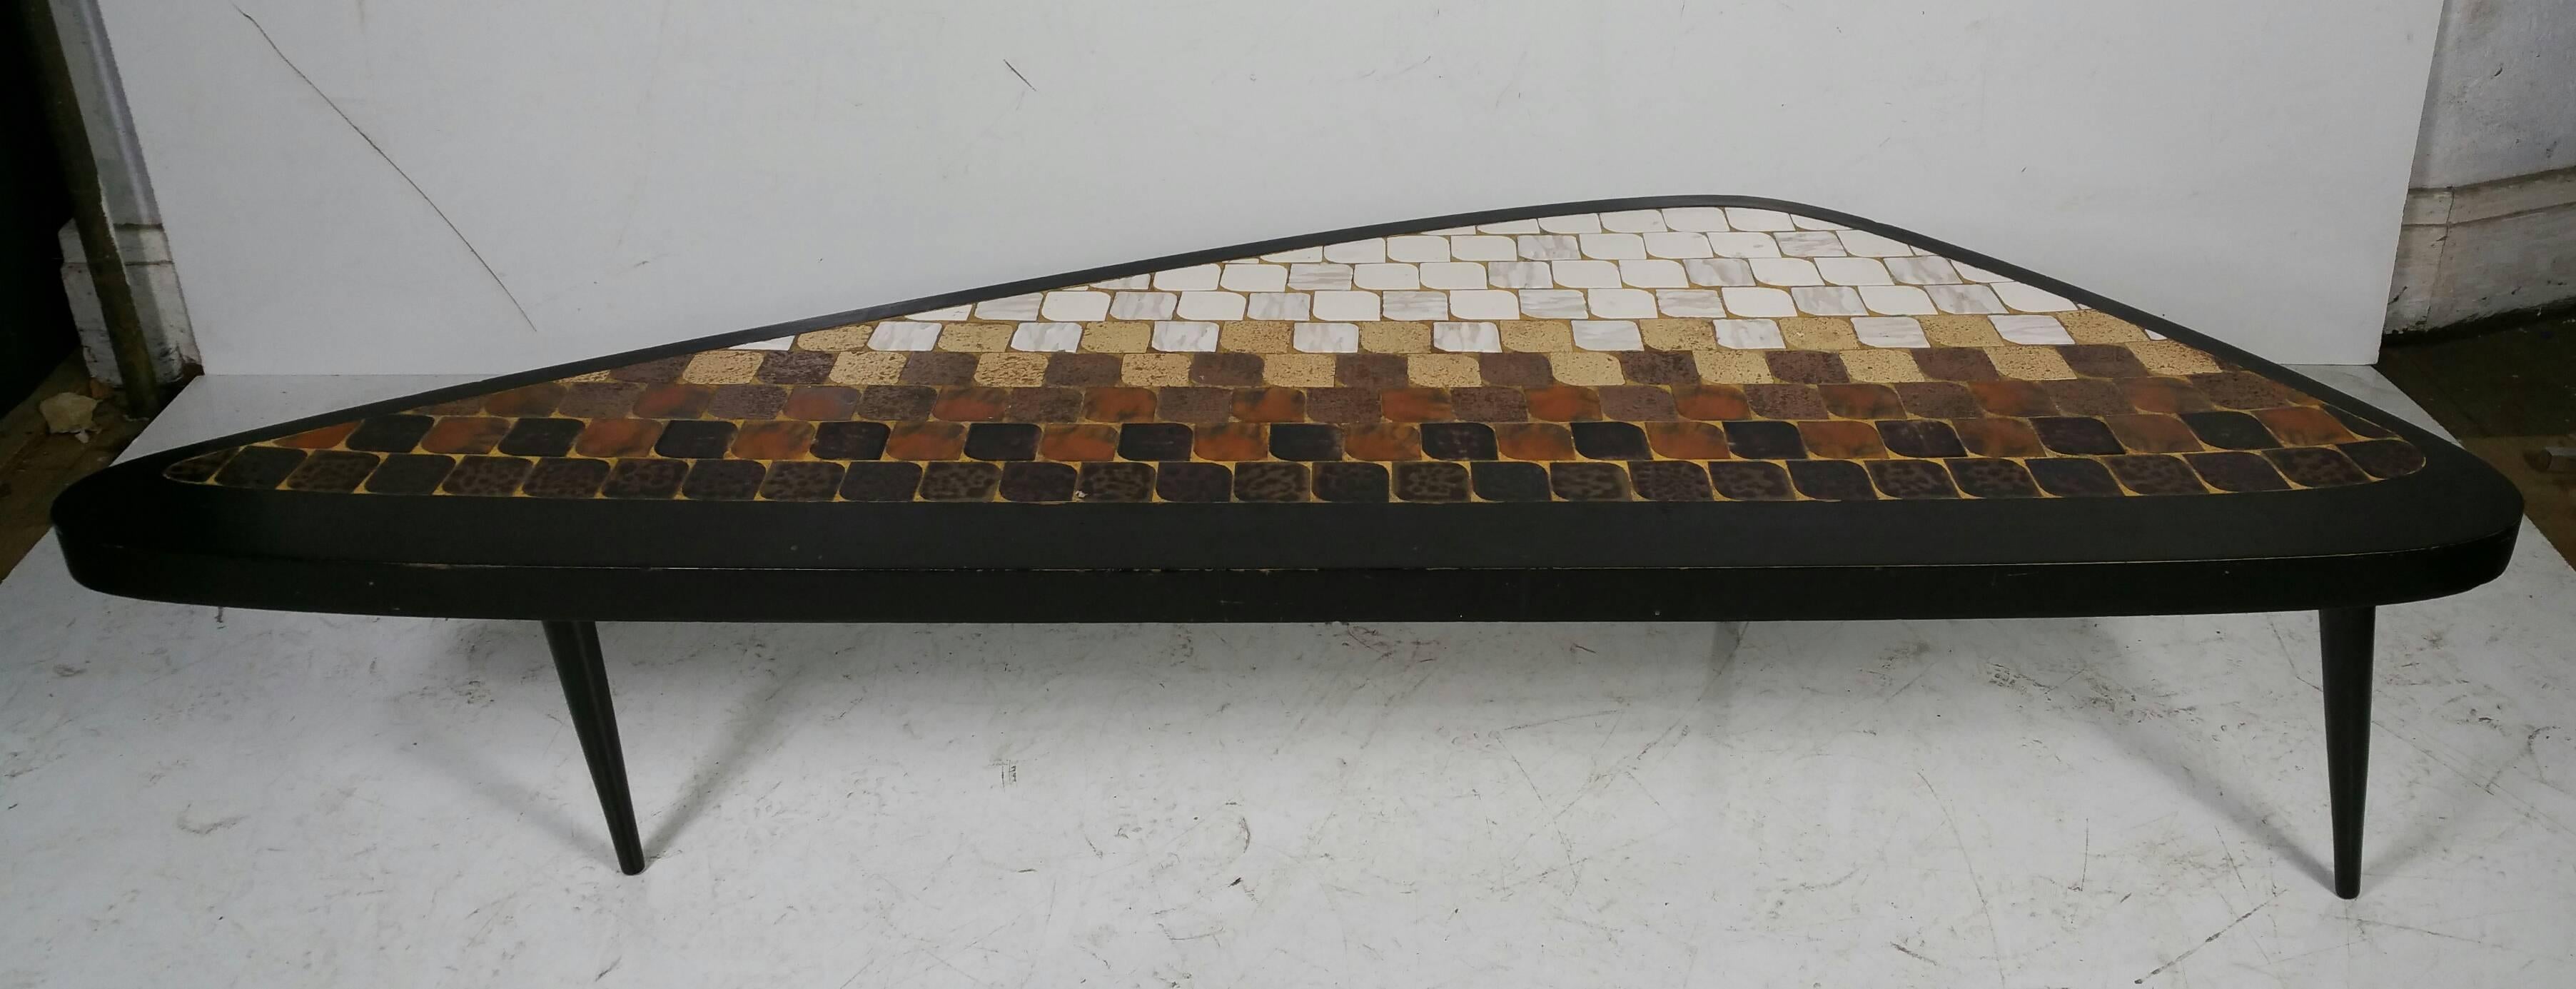 Mid-Century Modern tile top table, manufactured by Hohenberg Originals, unusual guitar pick shape, black lacquer frame, thoughtfully placed earthtone ceramic tiles, wonderful proportion.